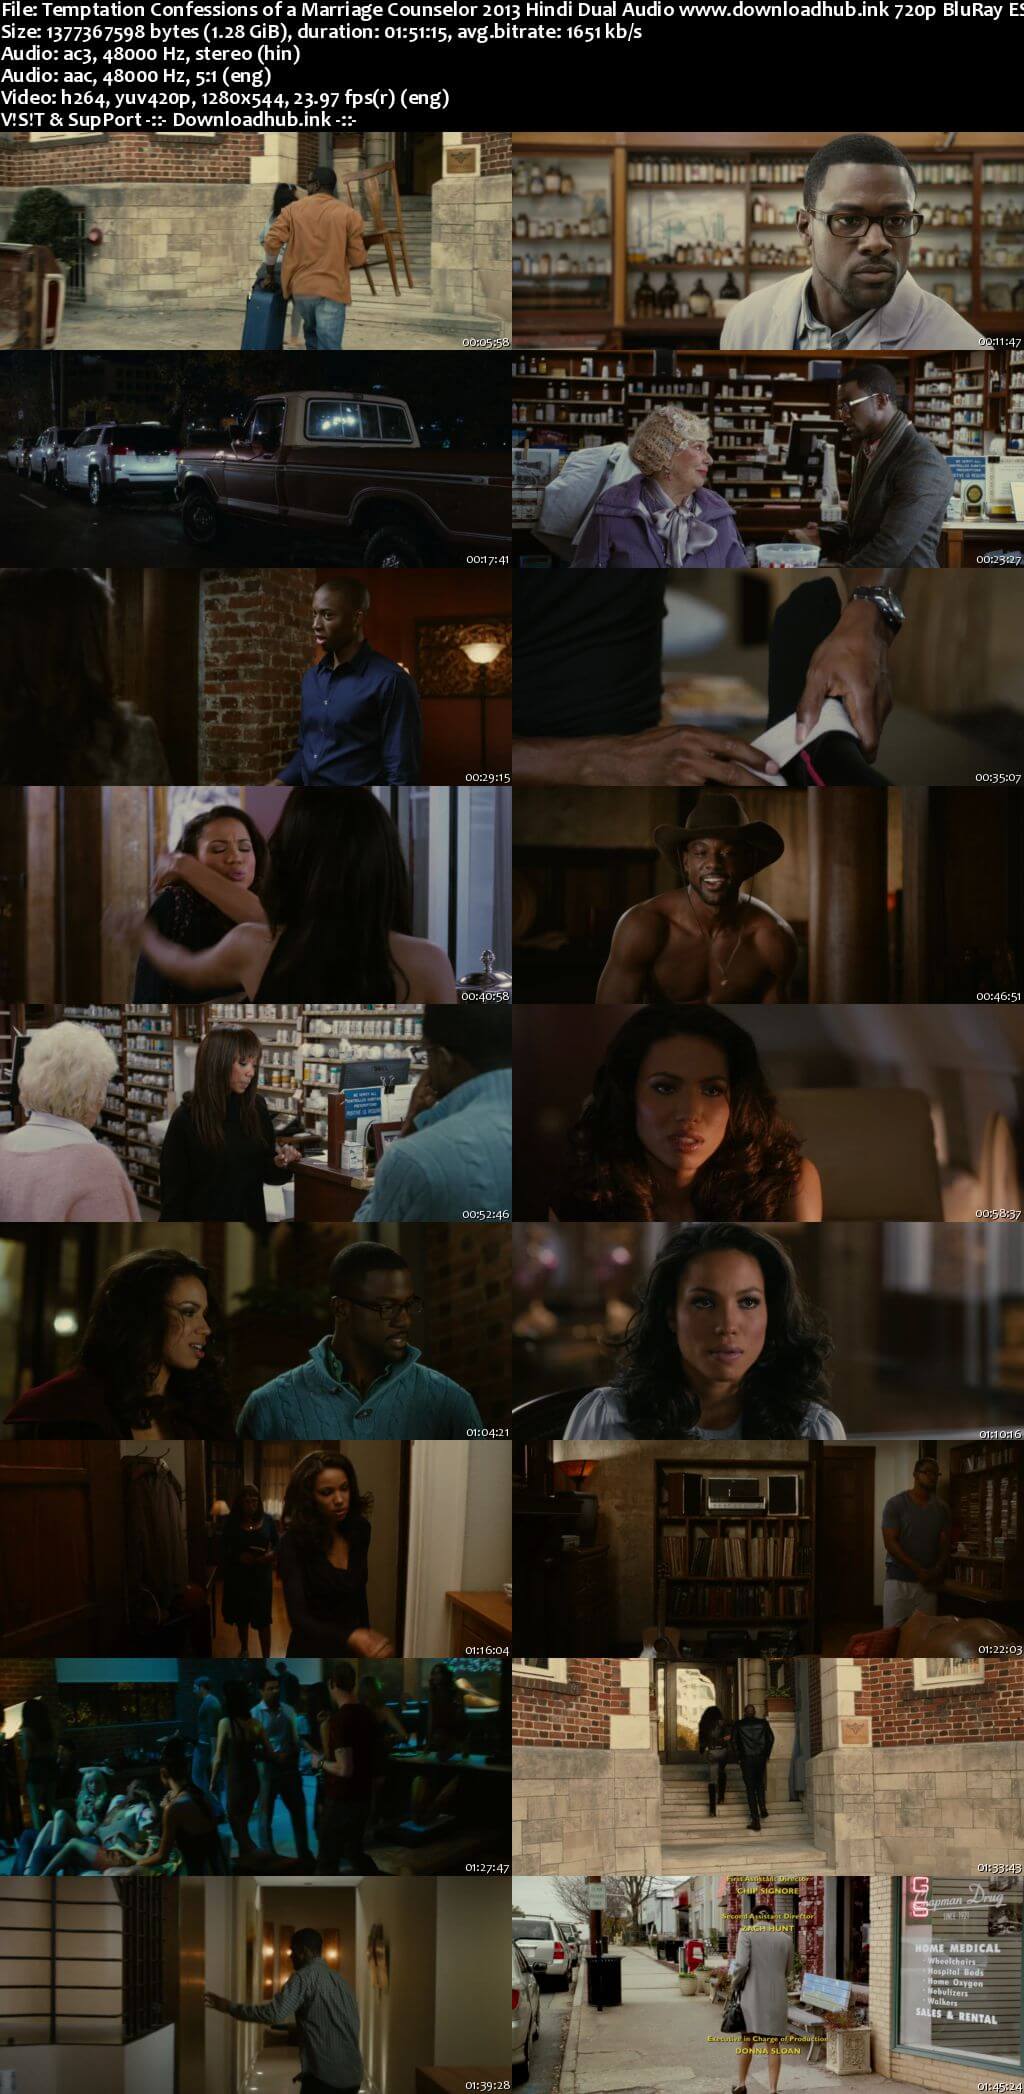 Temptation Confessions of a Marriage Counselor 2013 Hindi Dual Audio 720p BluRay ESubs